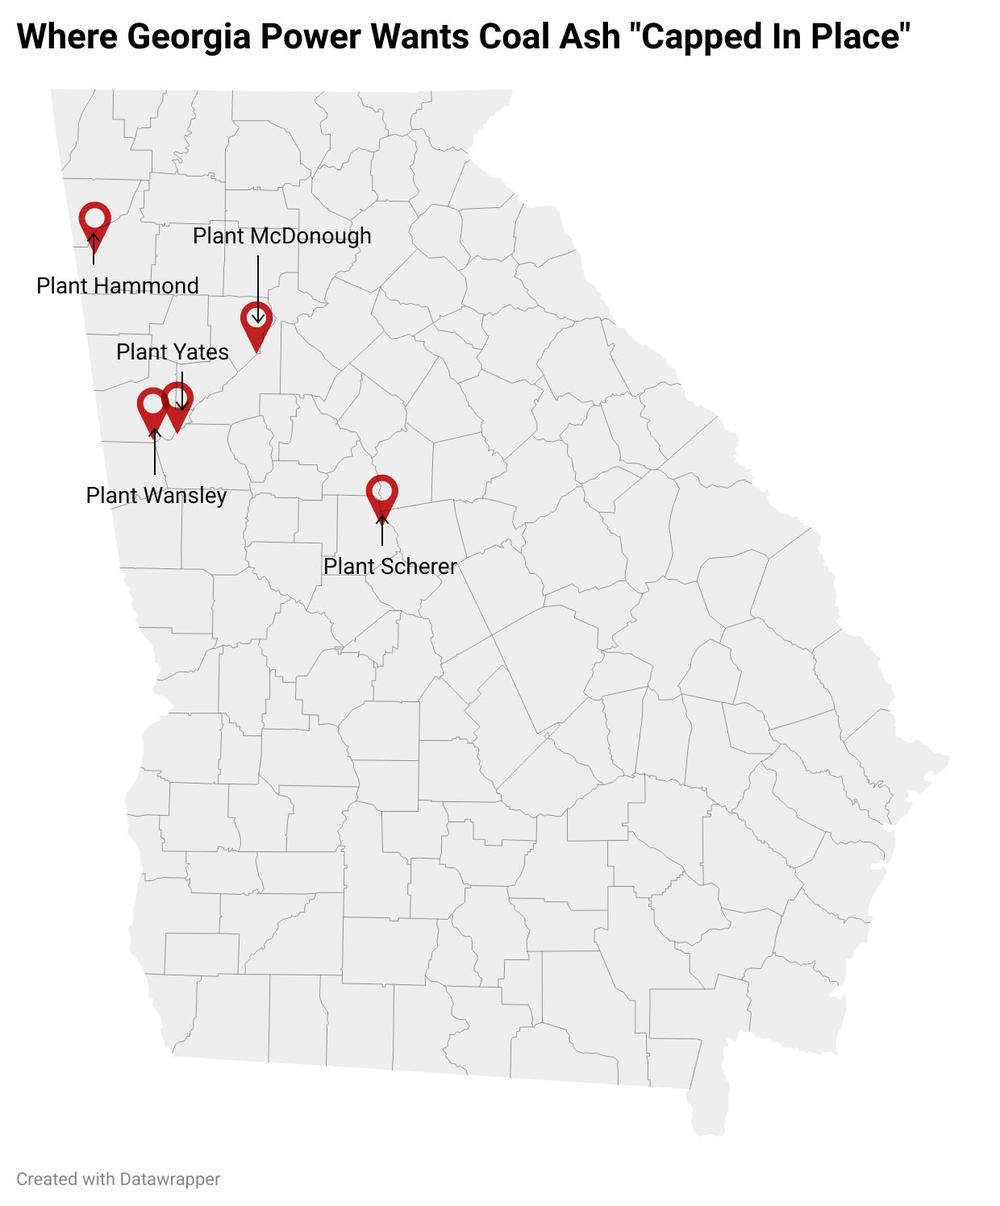 Where Georgia Power is asking to keep coal ash in unlined storage. 